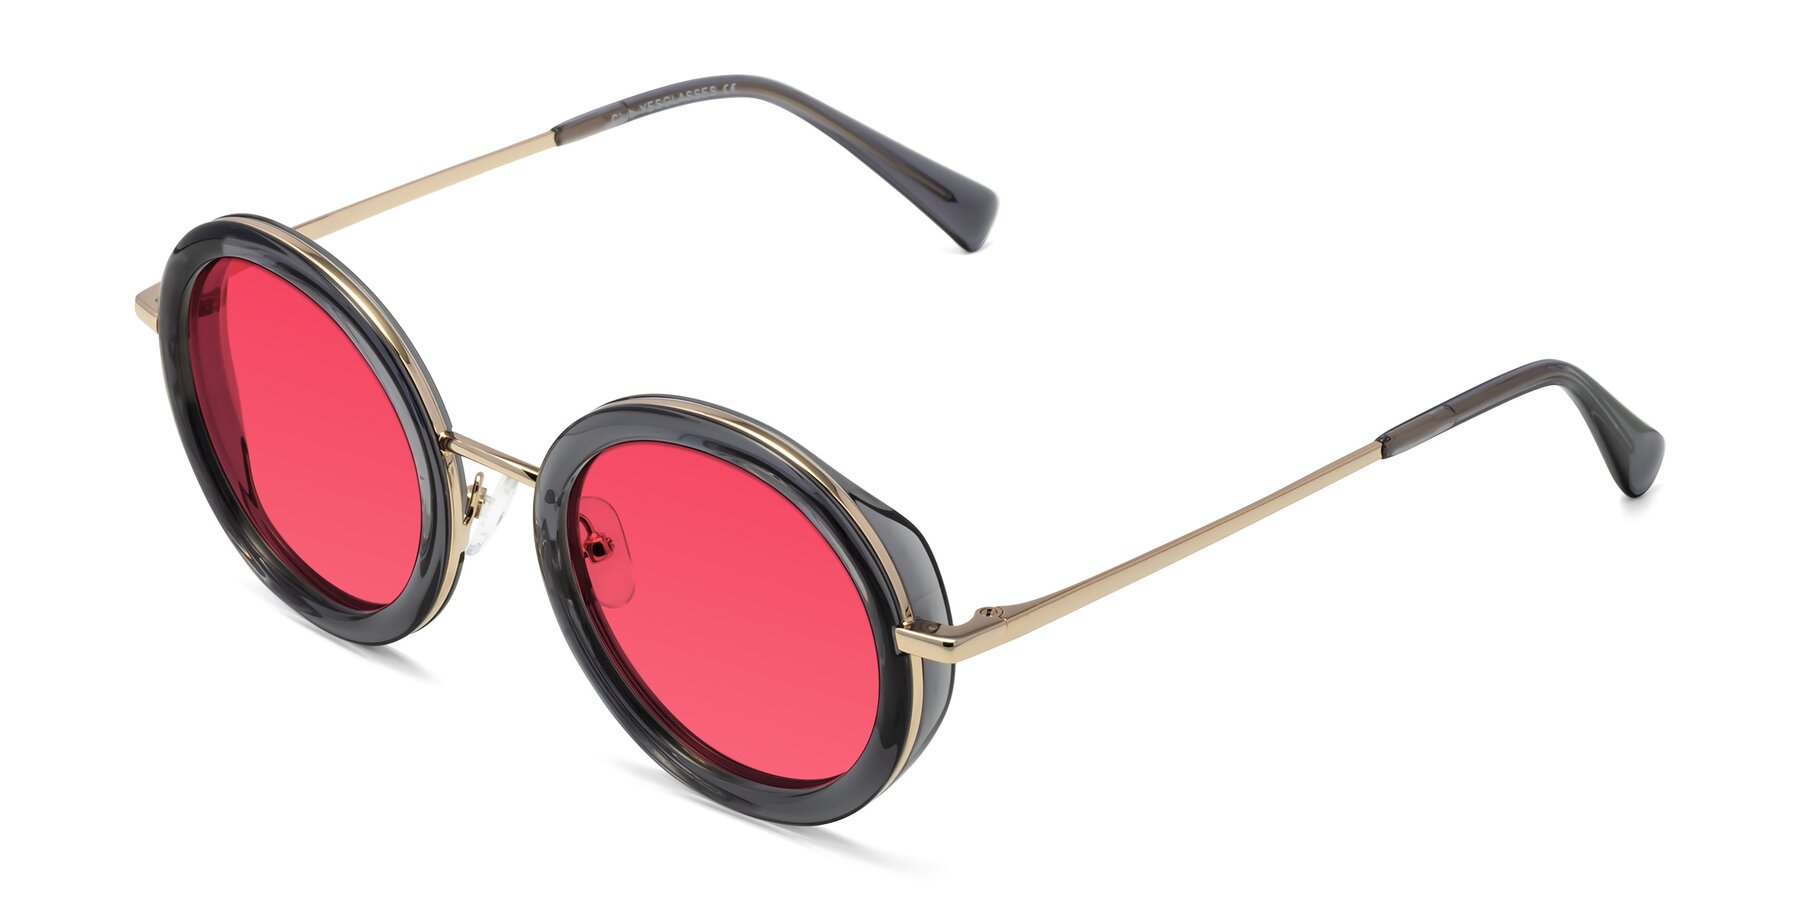 Angle of Club in Gray-Gold with Red Tinted Lenses